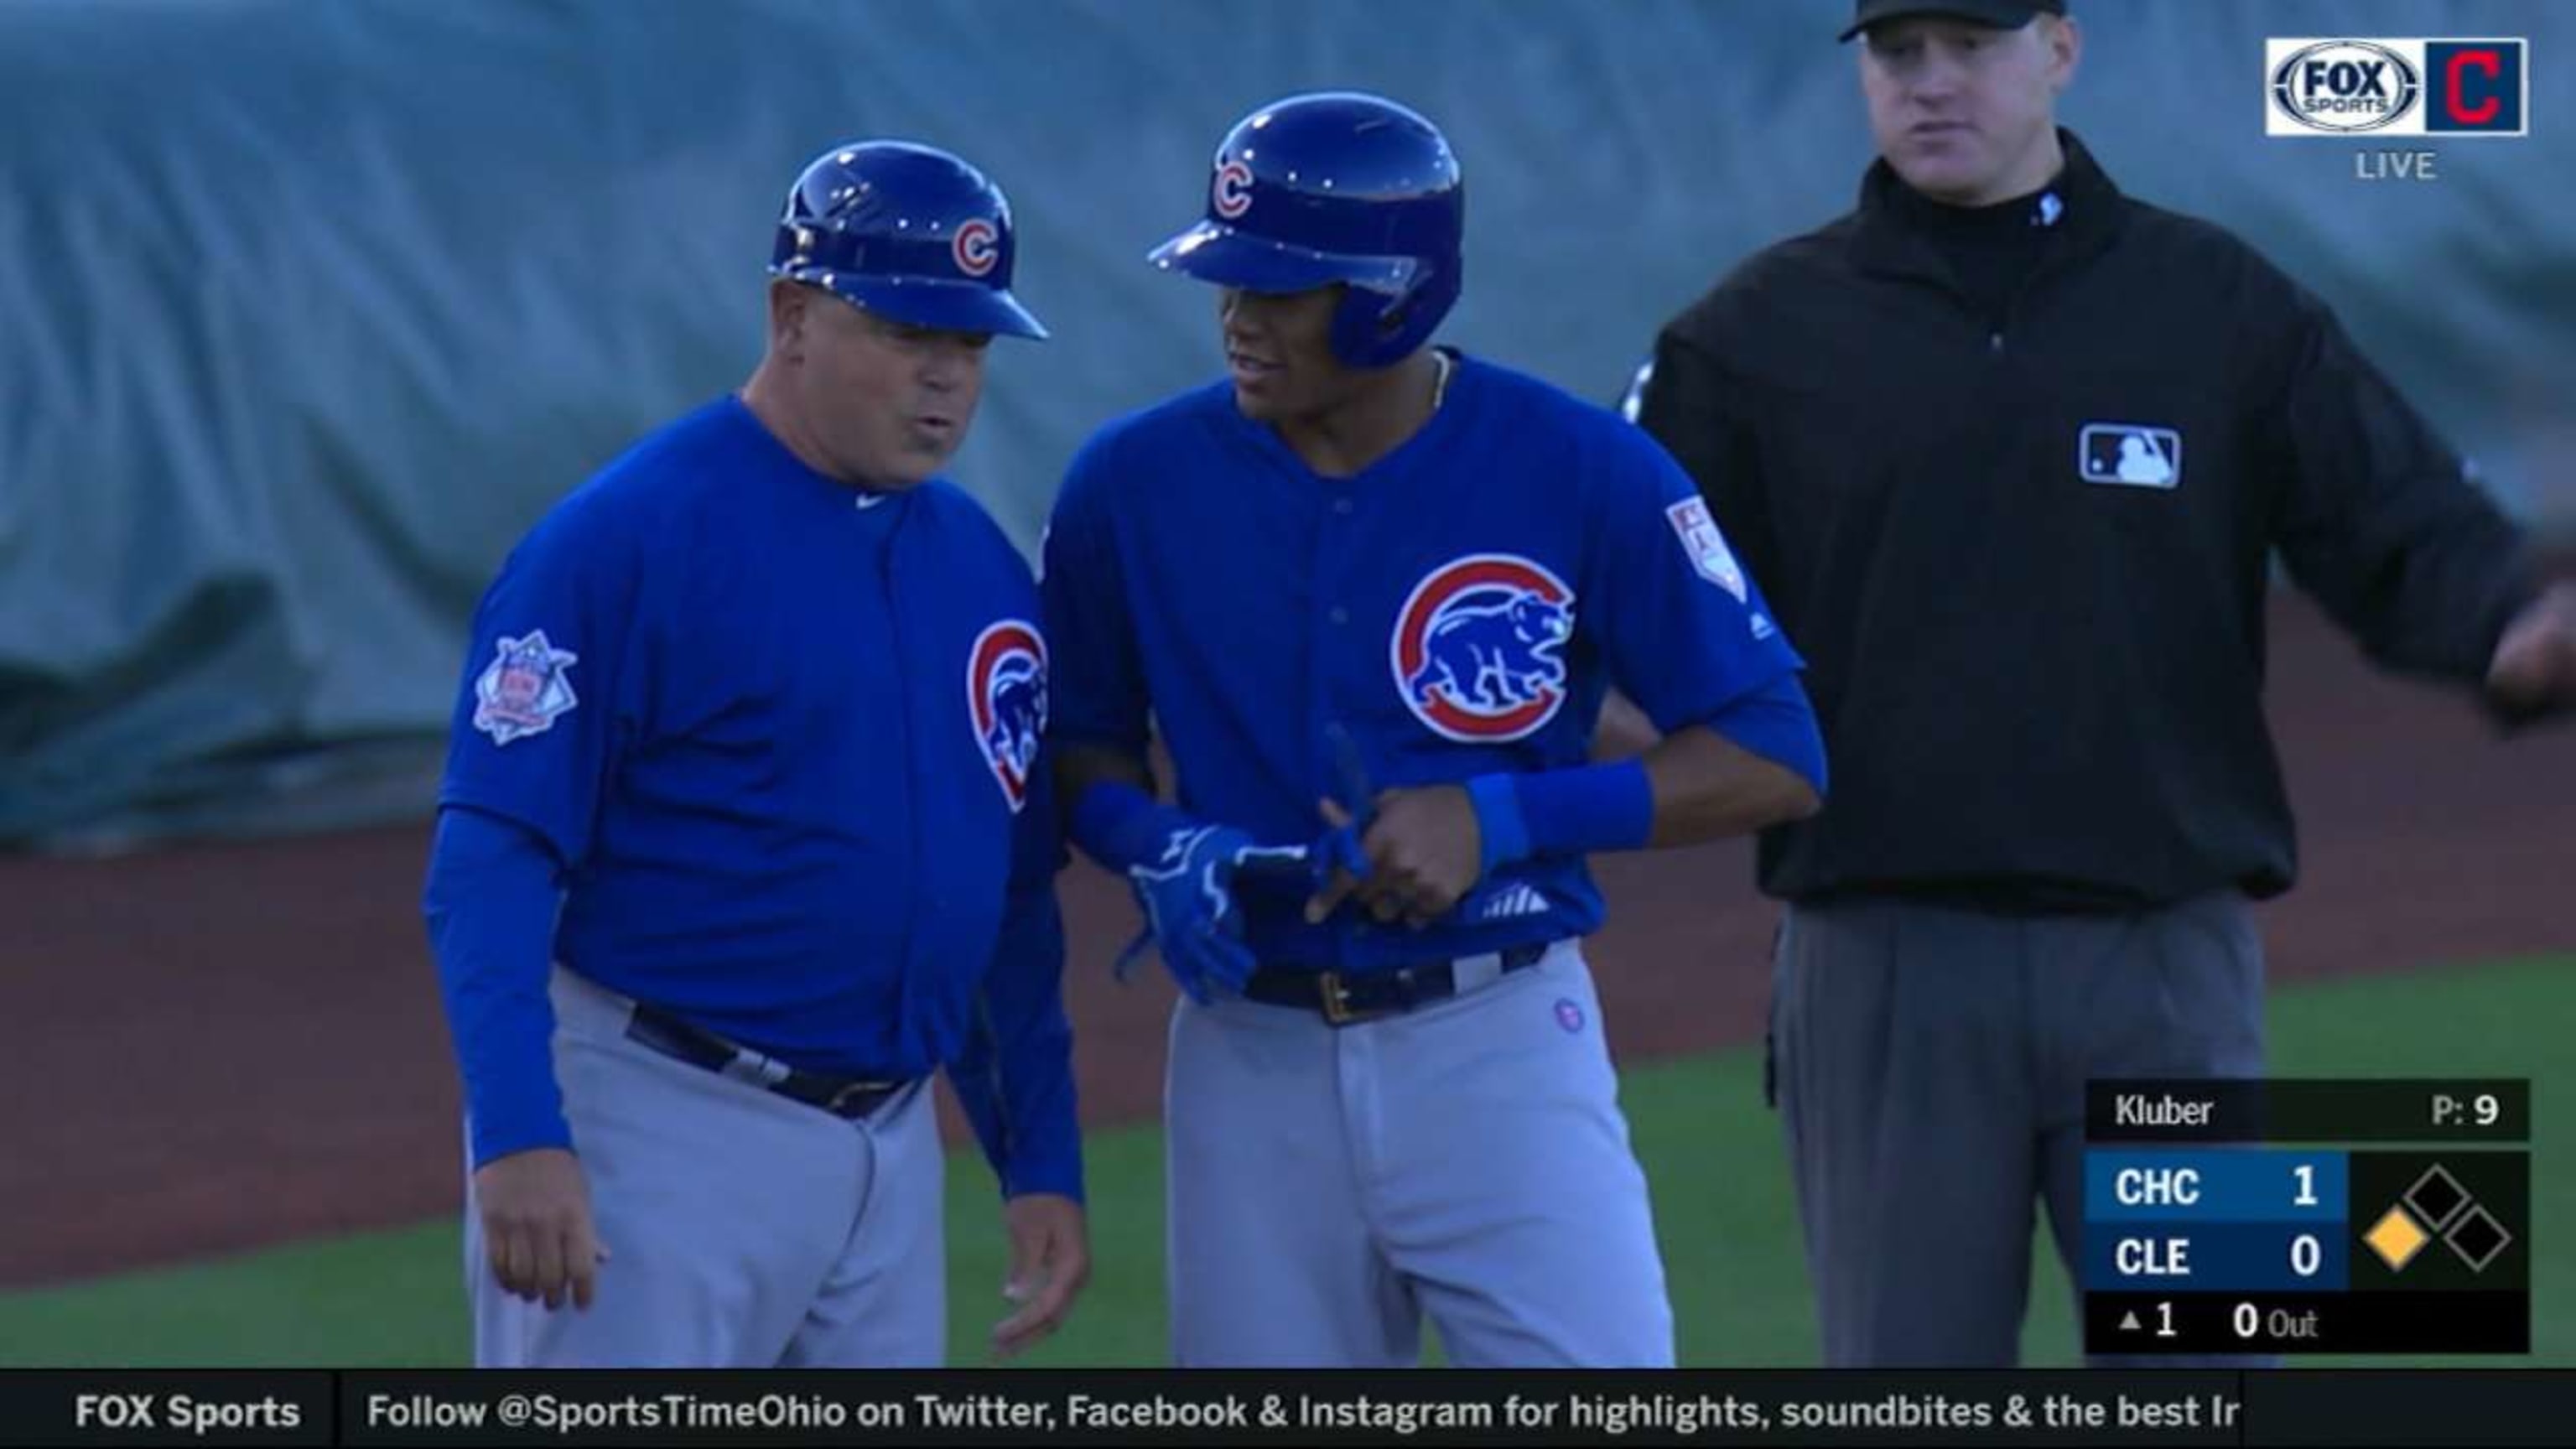 Suspended Addison Russell gets 7-game stint with Iowa Cubs